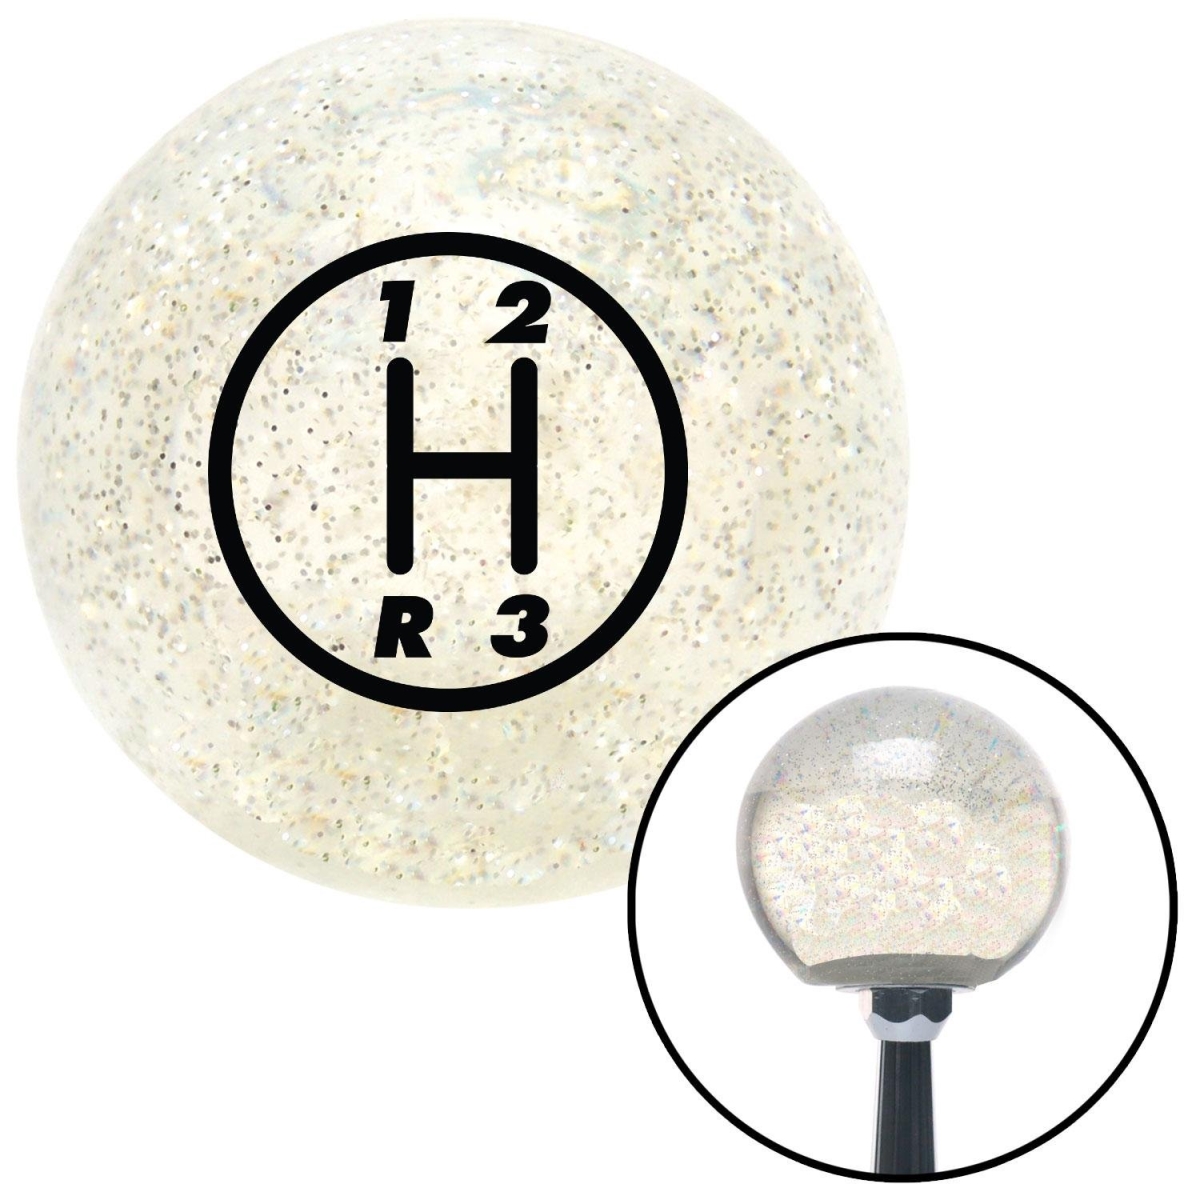 American Shifter 89521 Black 3 Speed Shift Pattern - 3RDL Clear Metal Flake Shift Knob with M16 x 1.5 Insert -  American Shifter Company